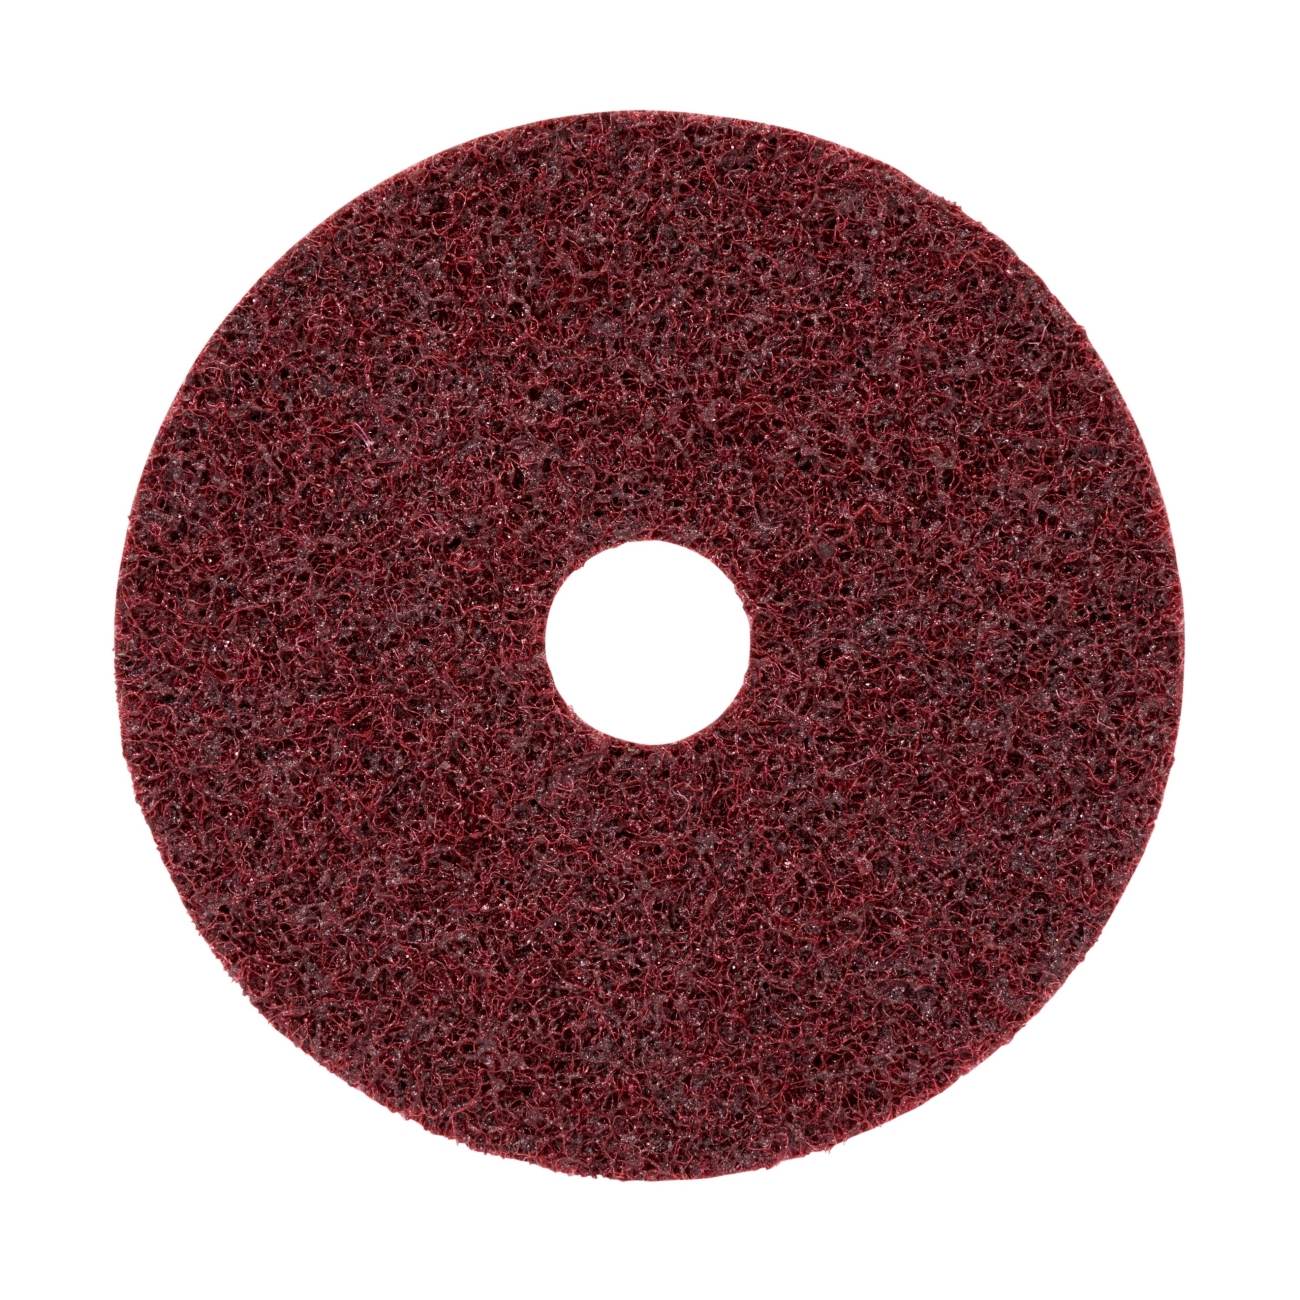 3M Scotch-Brite Non-woven disc SC-DH with centring, red, 178 mm, 22 mm, A, medium